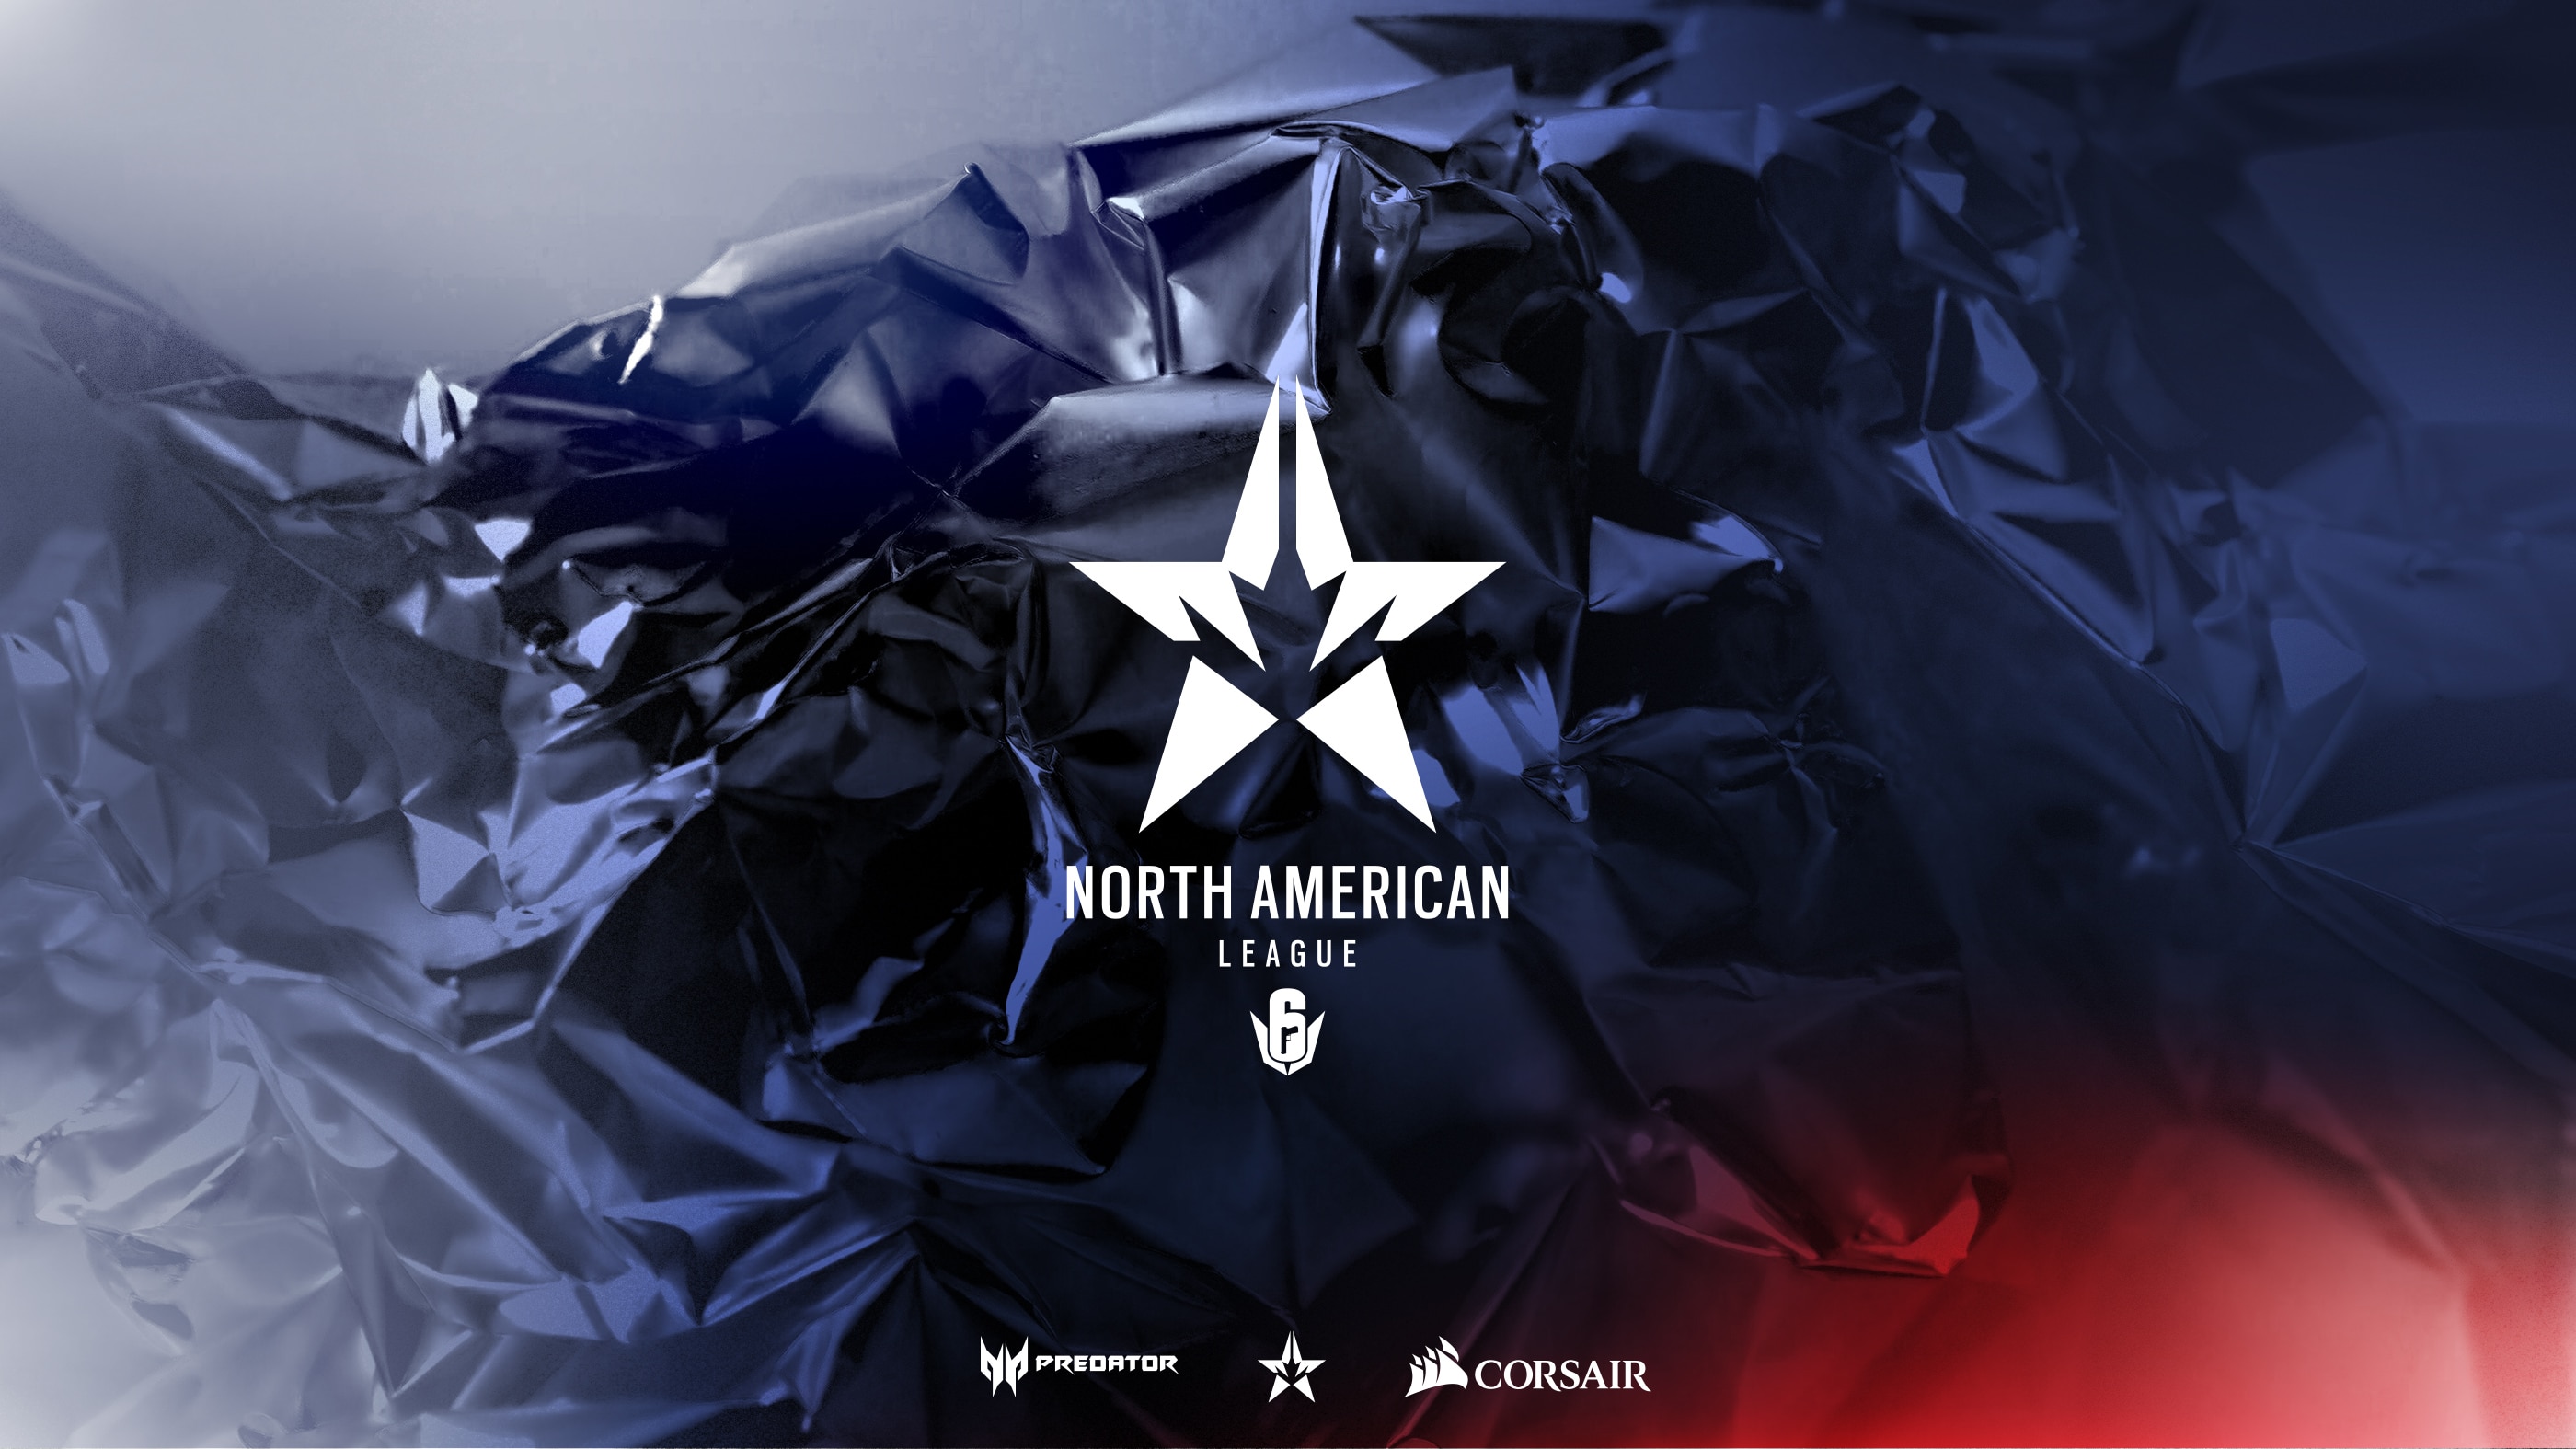 Announcing the Rainbow 6 North American League